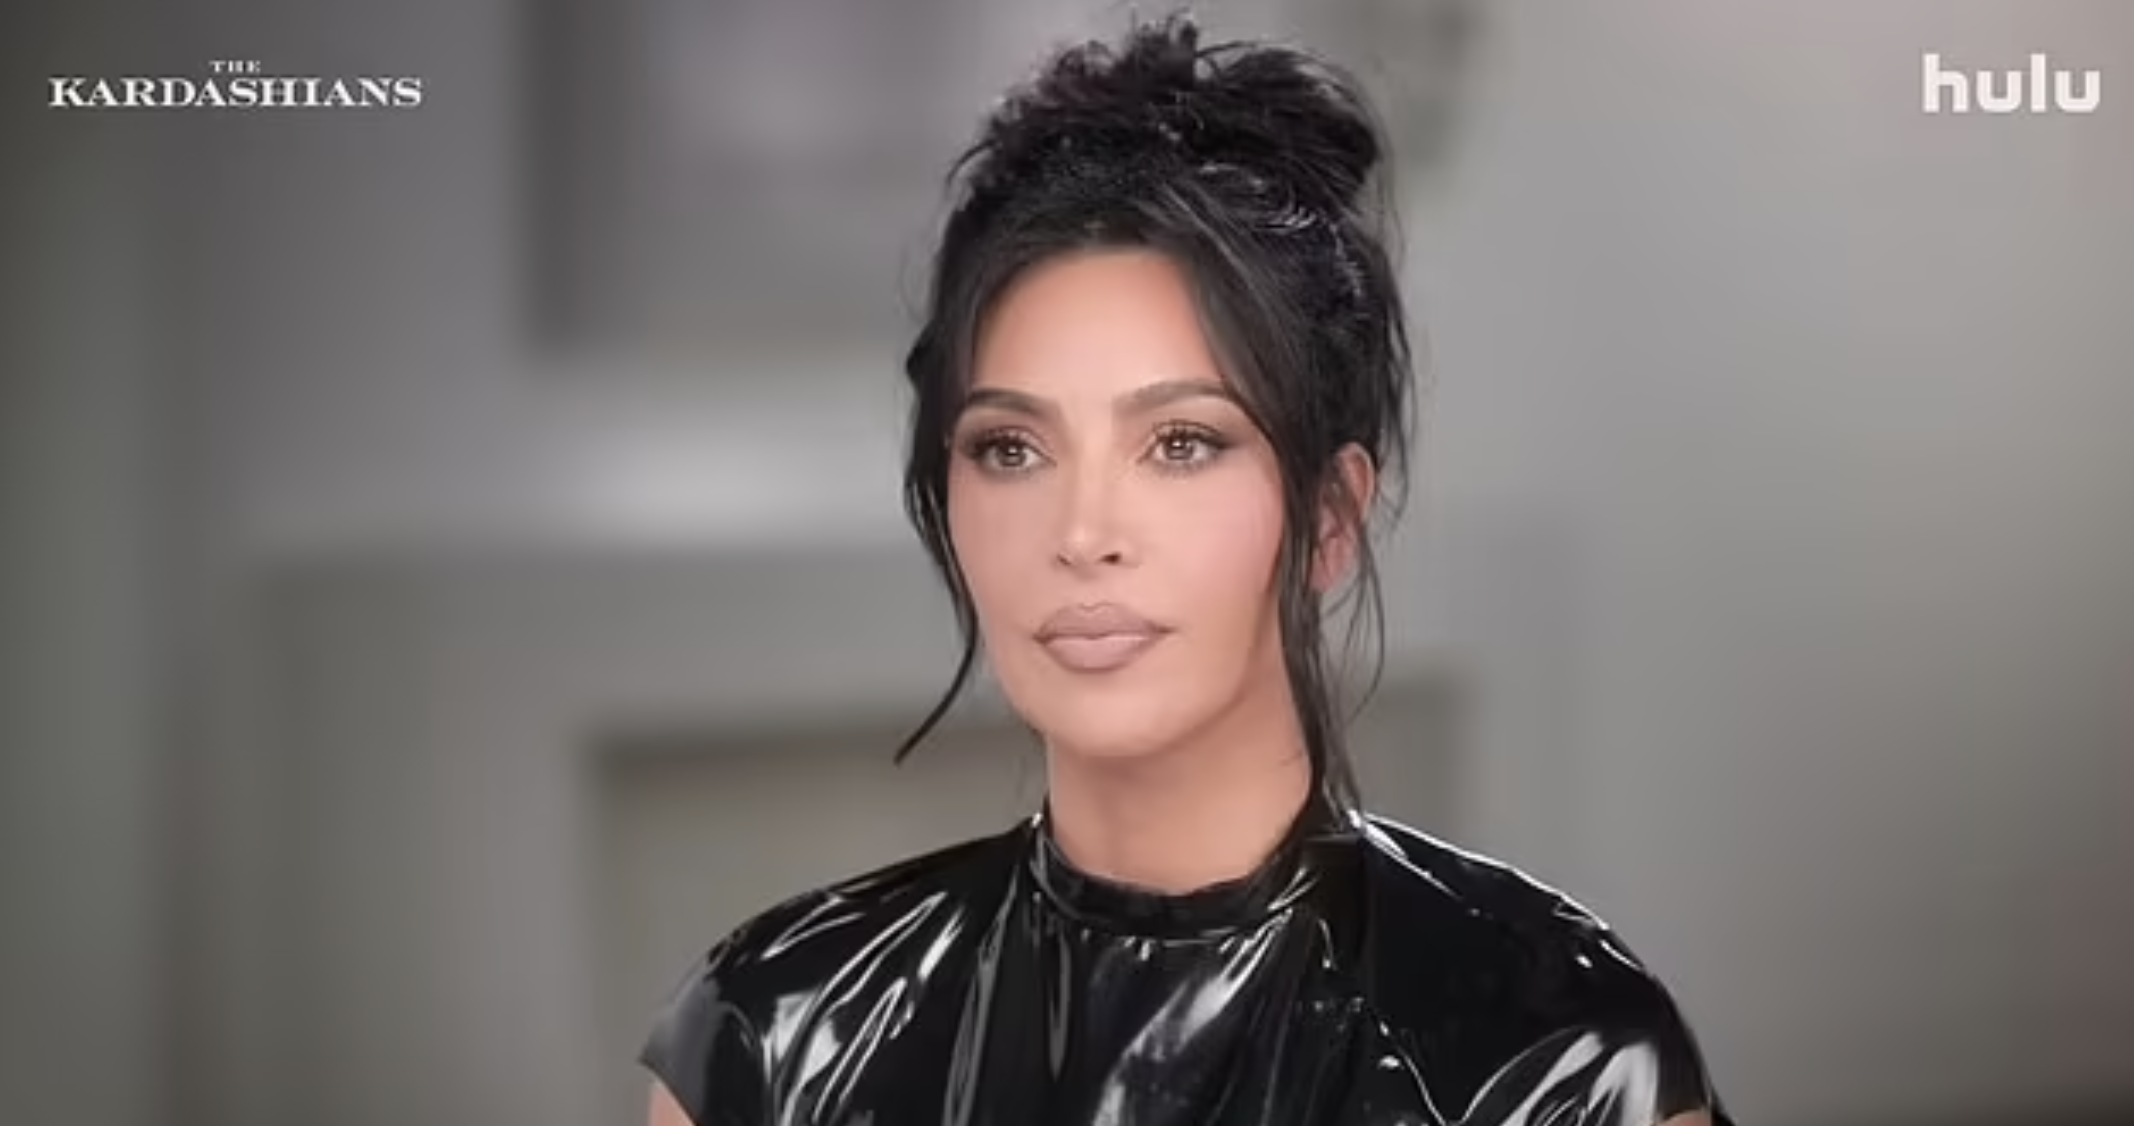 Kim Kardashian Is At War With One Of Her Sisters – And It’s Not Kourtney